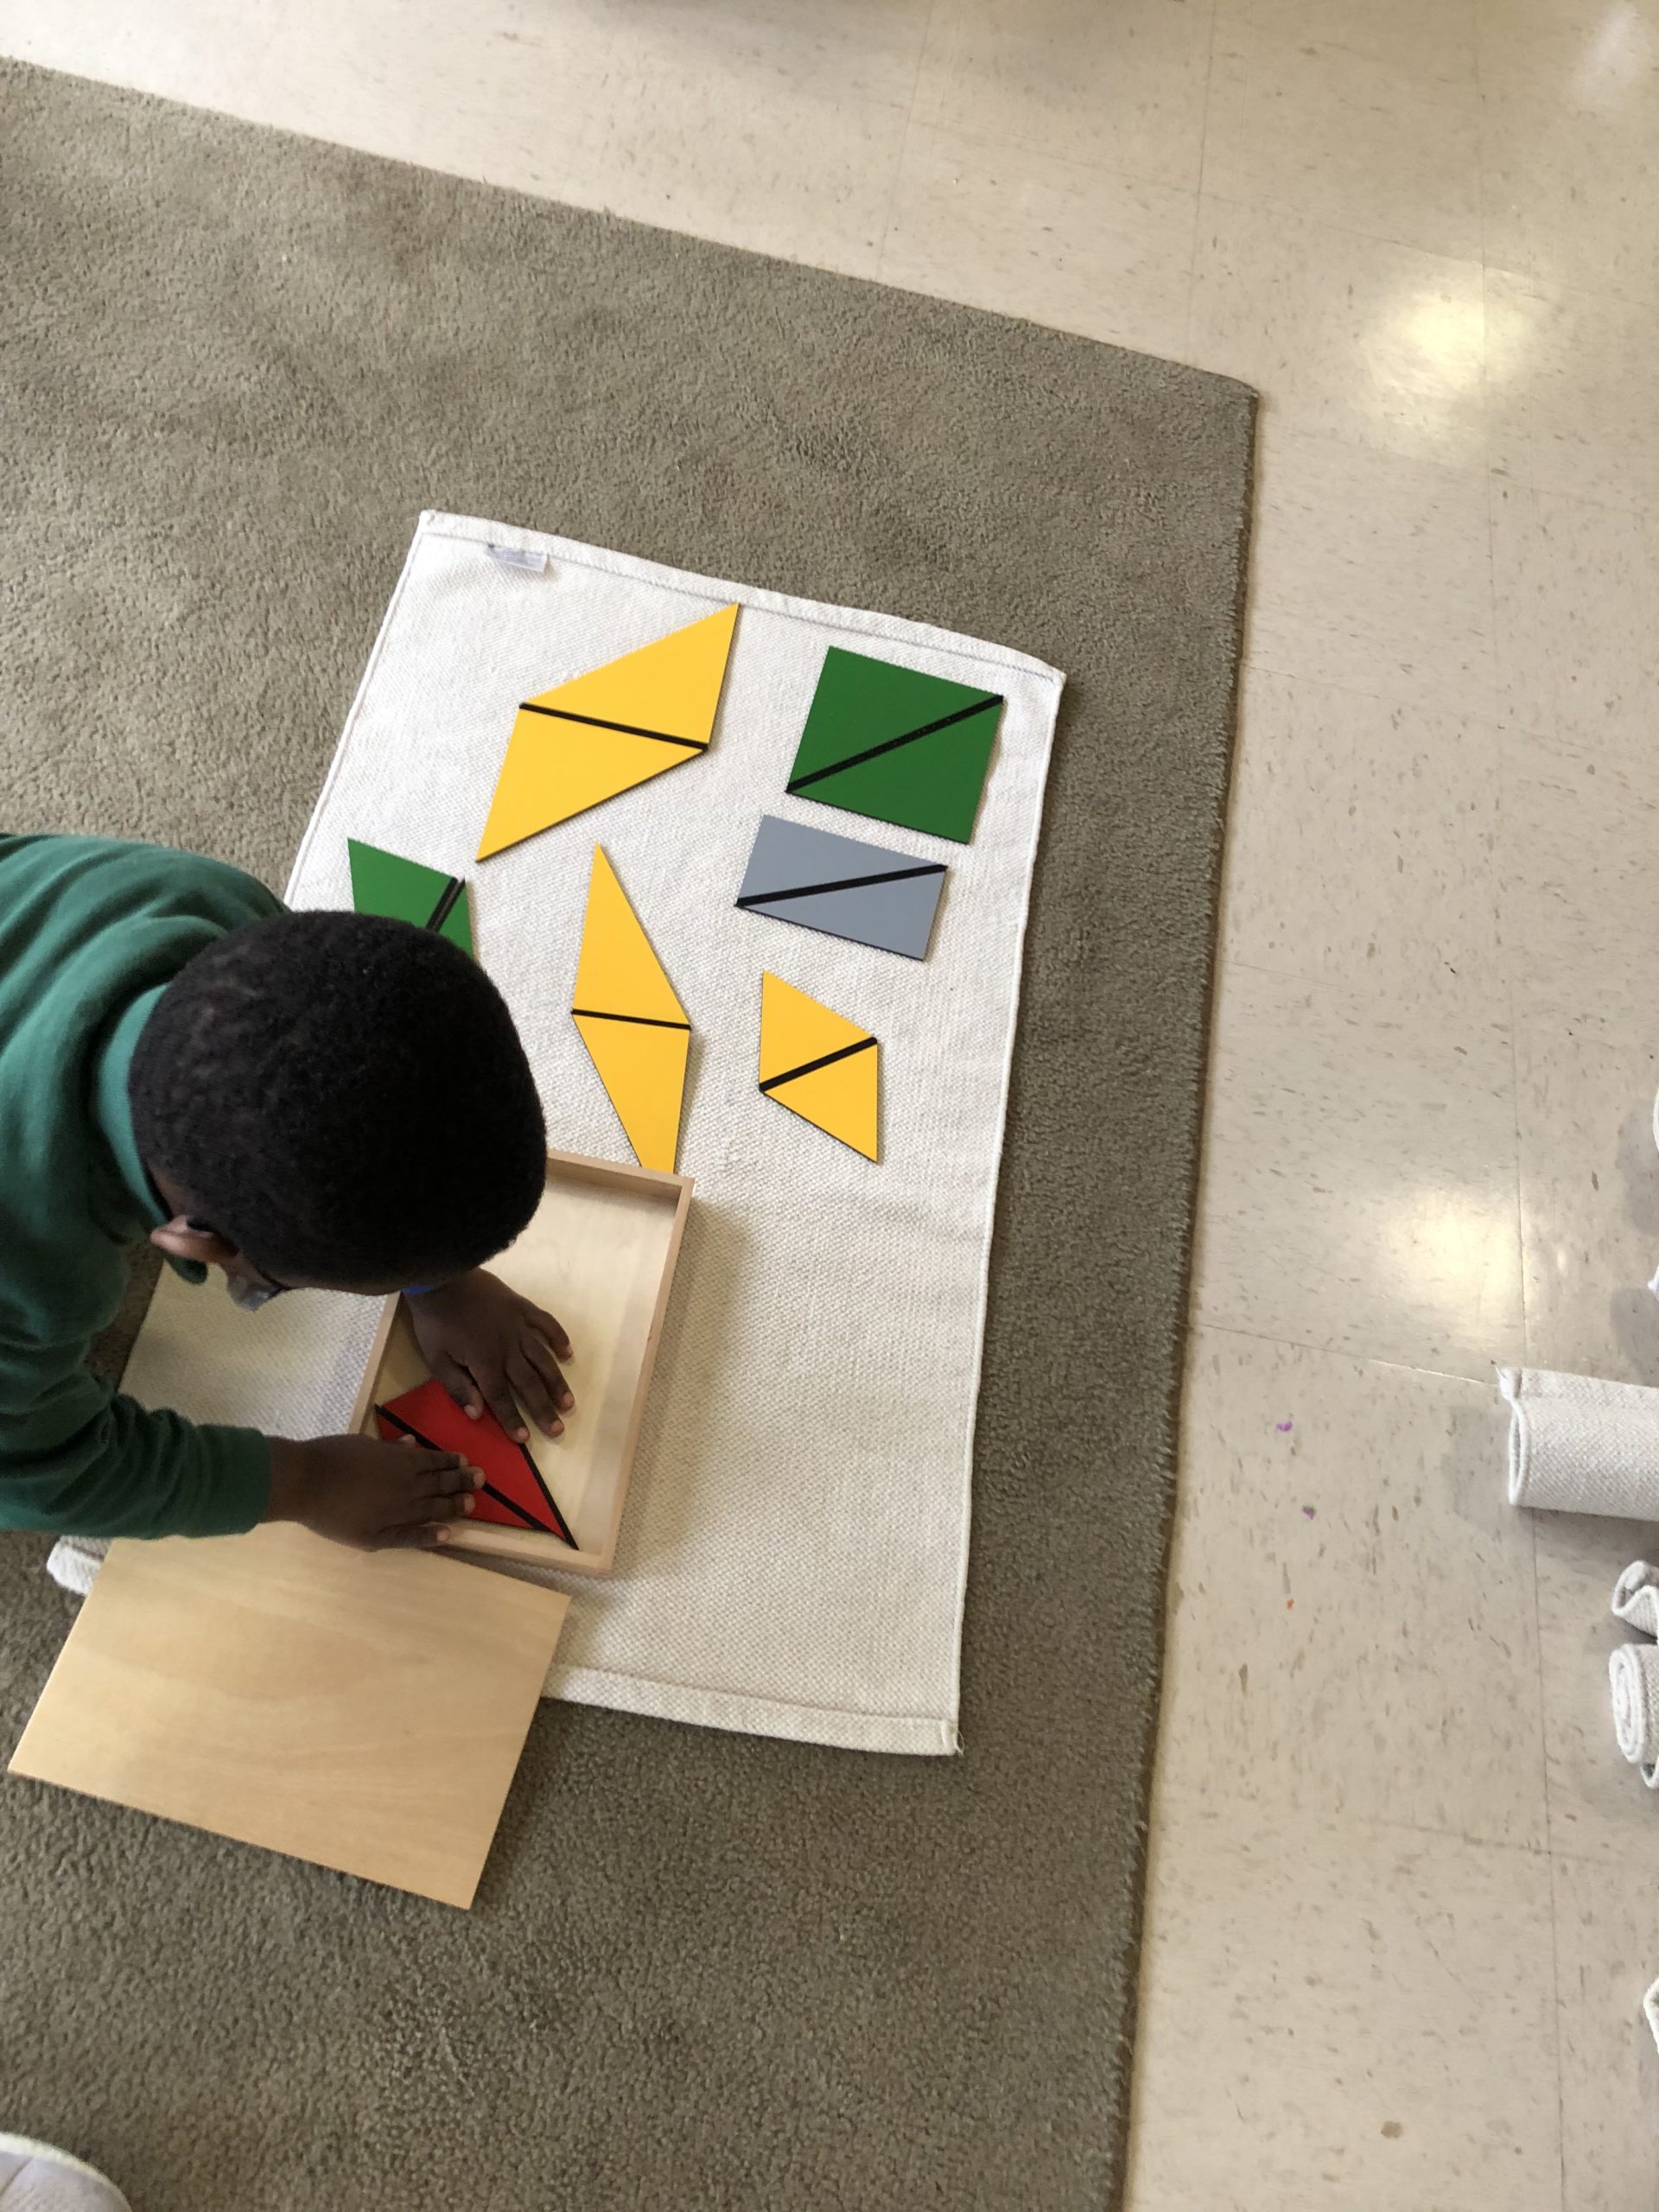 Student with Constructive Triangle Rectangular Box